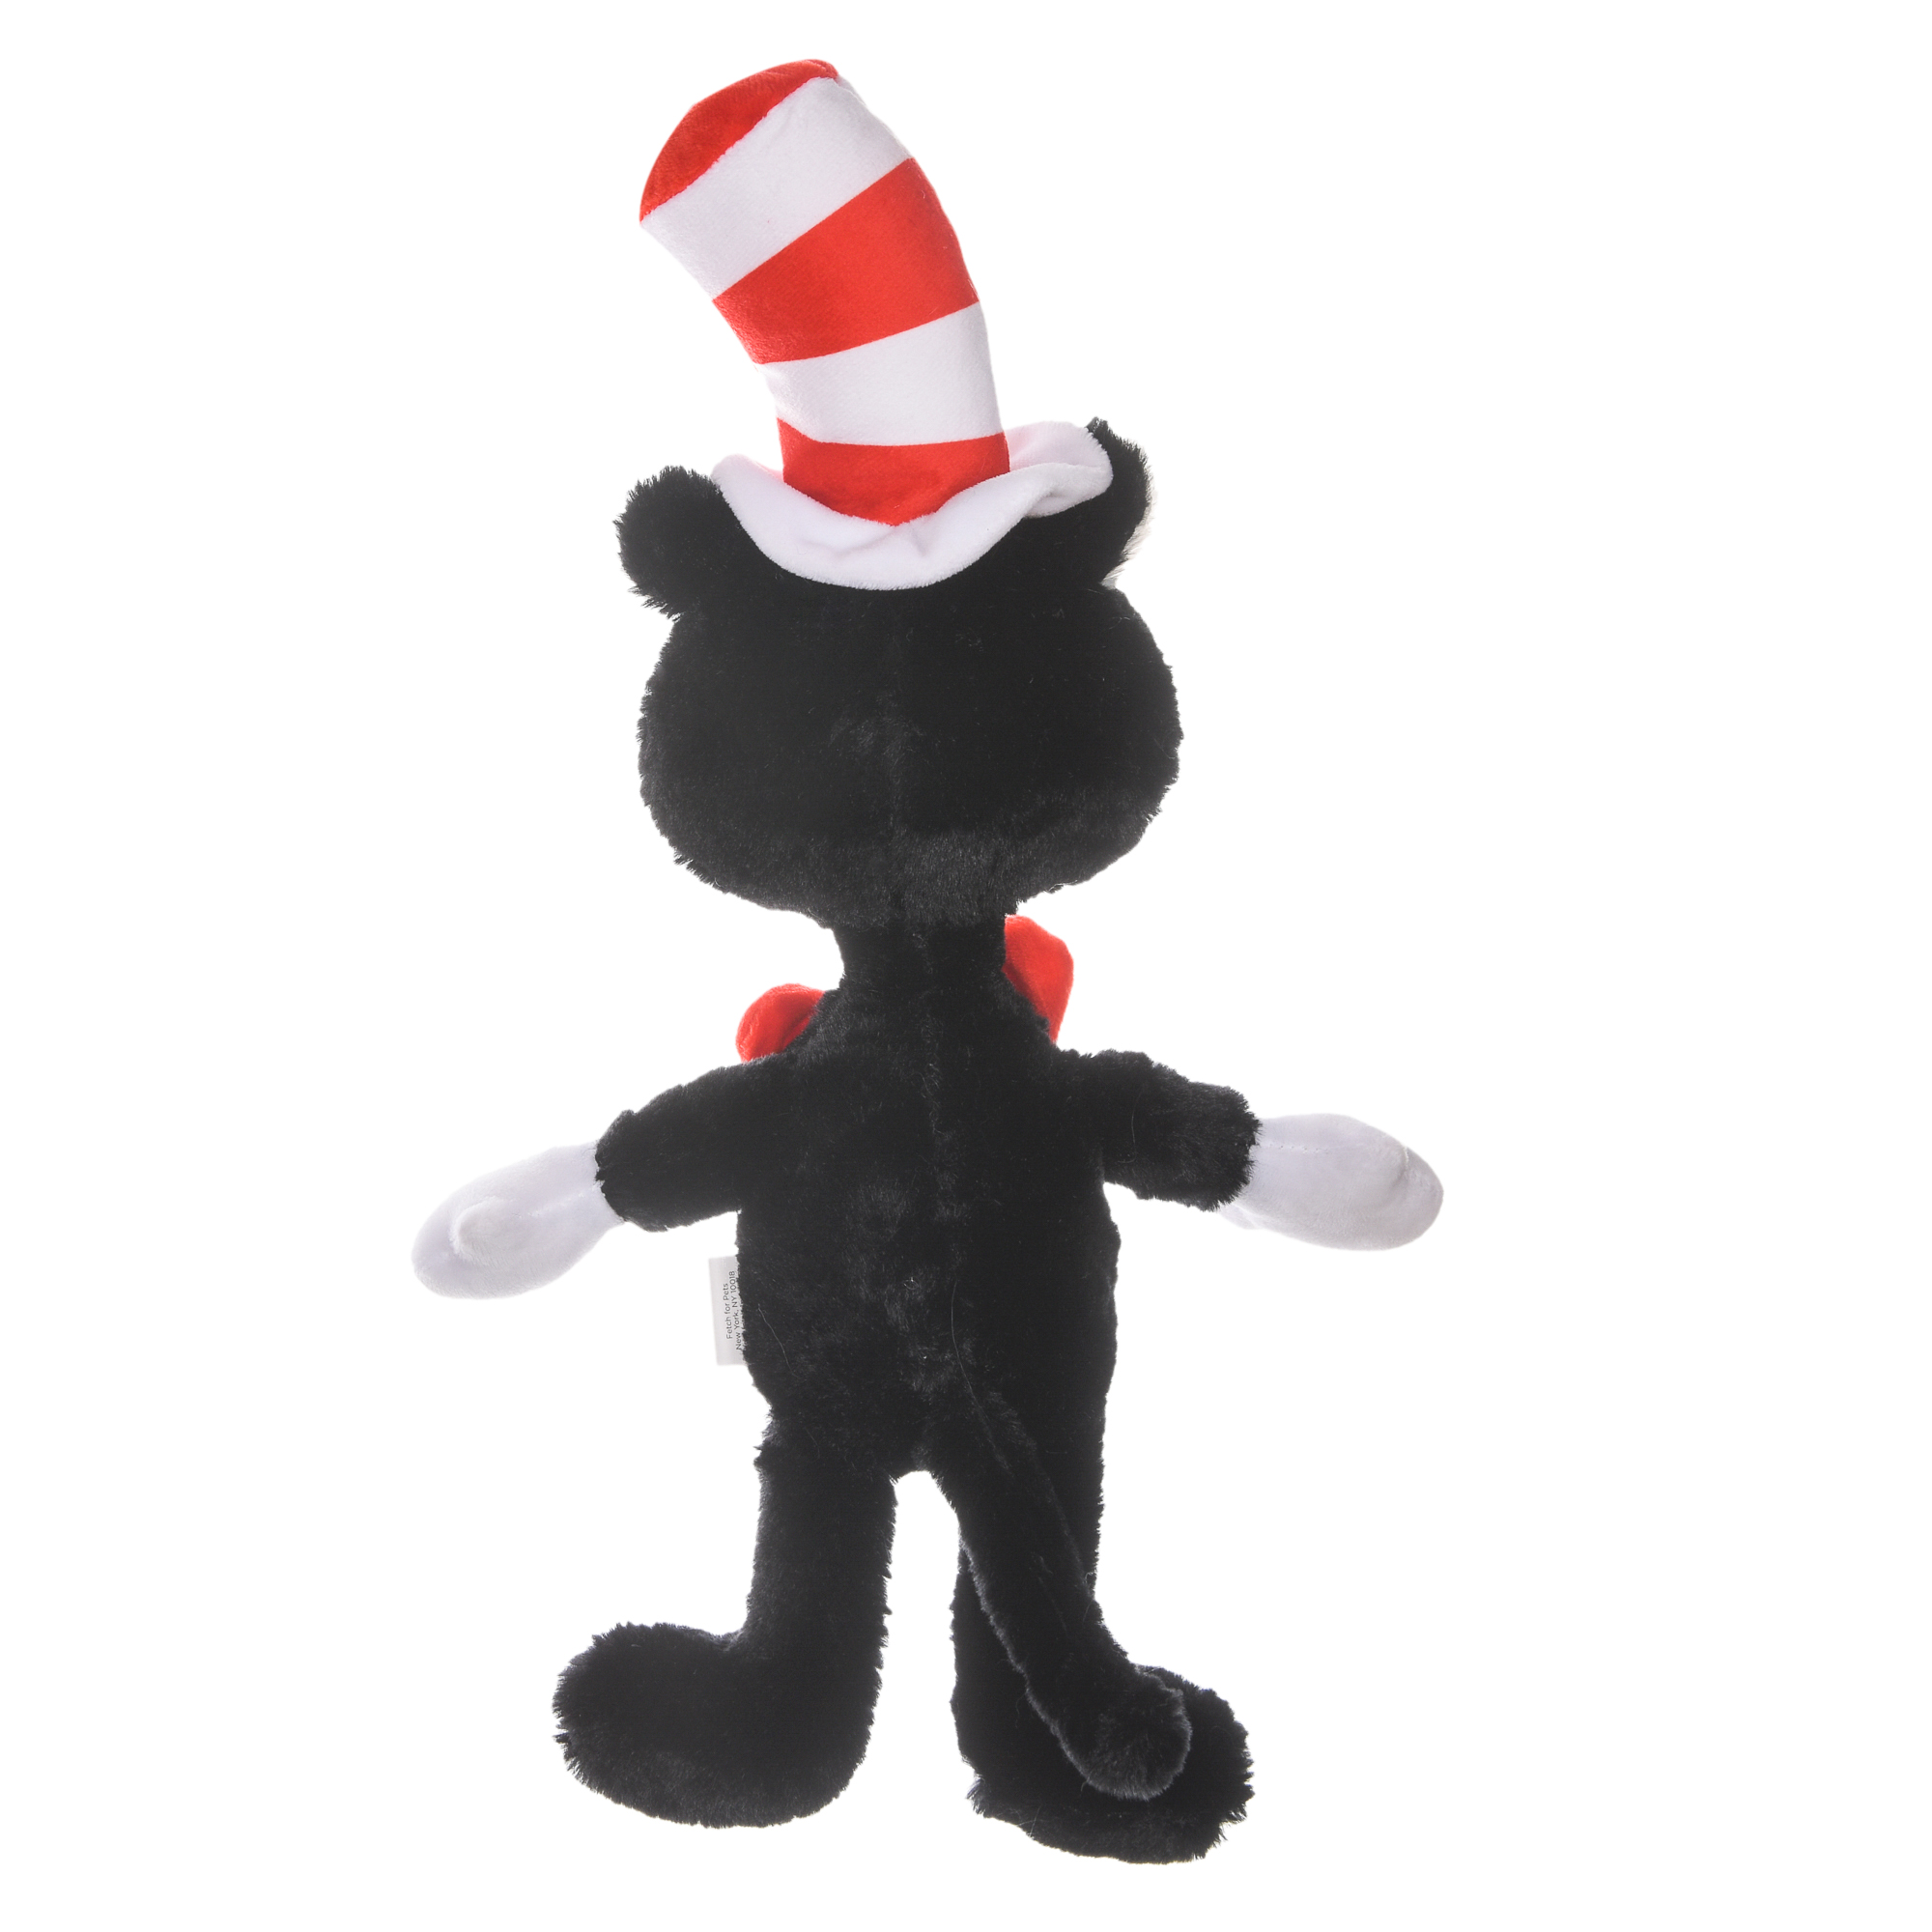 Dr. Seuss Cat in the Hat Figure Plush Dog Toy | Dog Toys, 9 Inch